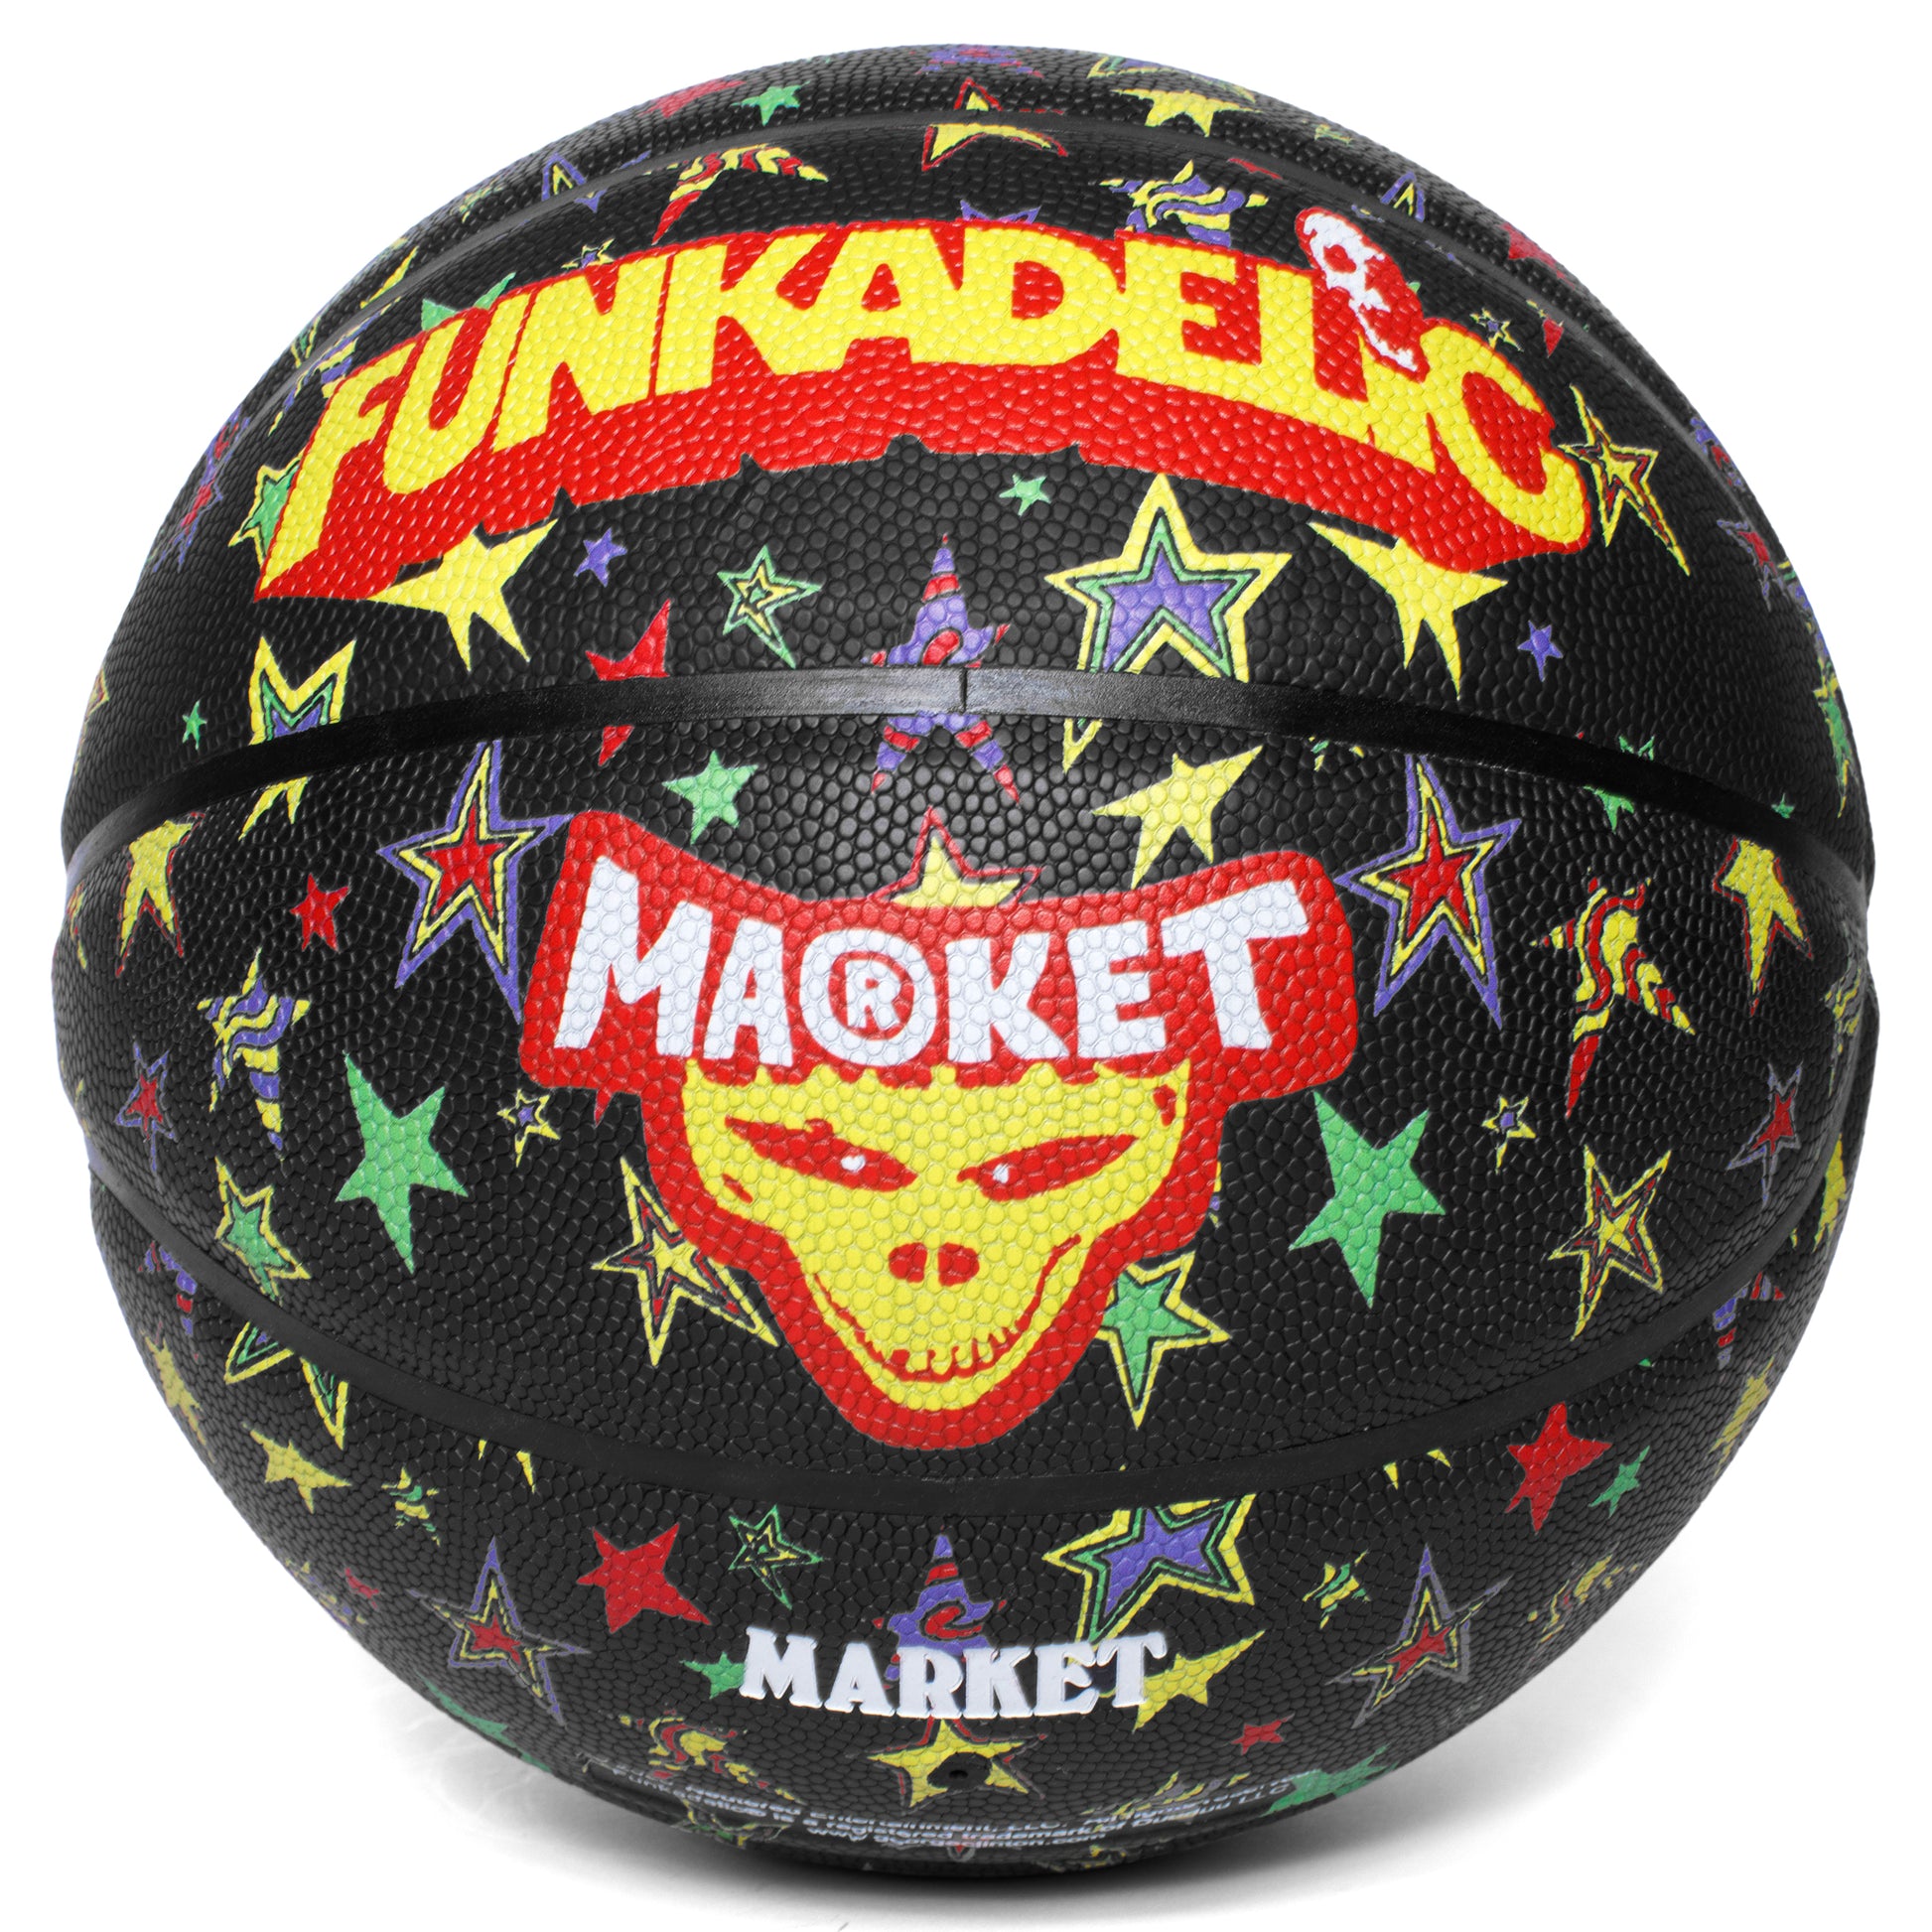 MARKET clothing brand FUNKADELIC MARKET STAR BASKETBALL. Find more basketballs, sporting goods, homegoods and graphic tees at MarketStudios.com. Formally Chinatown Market.